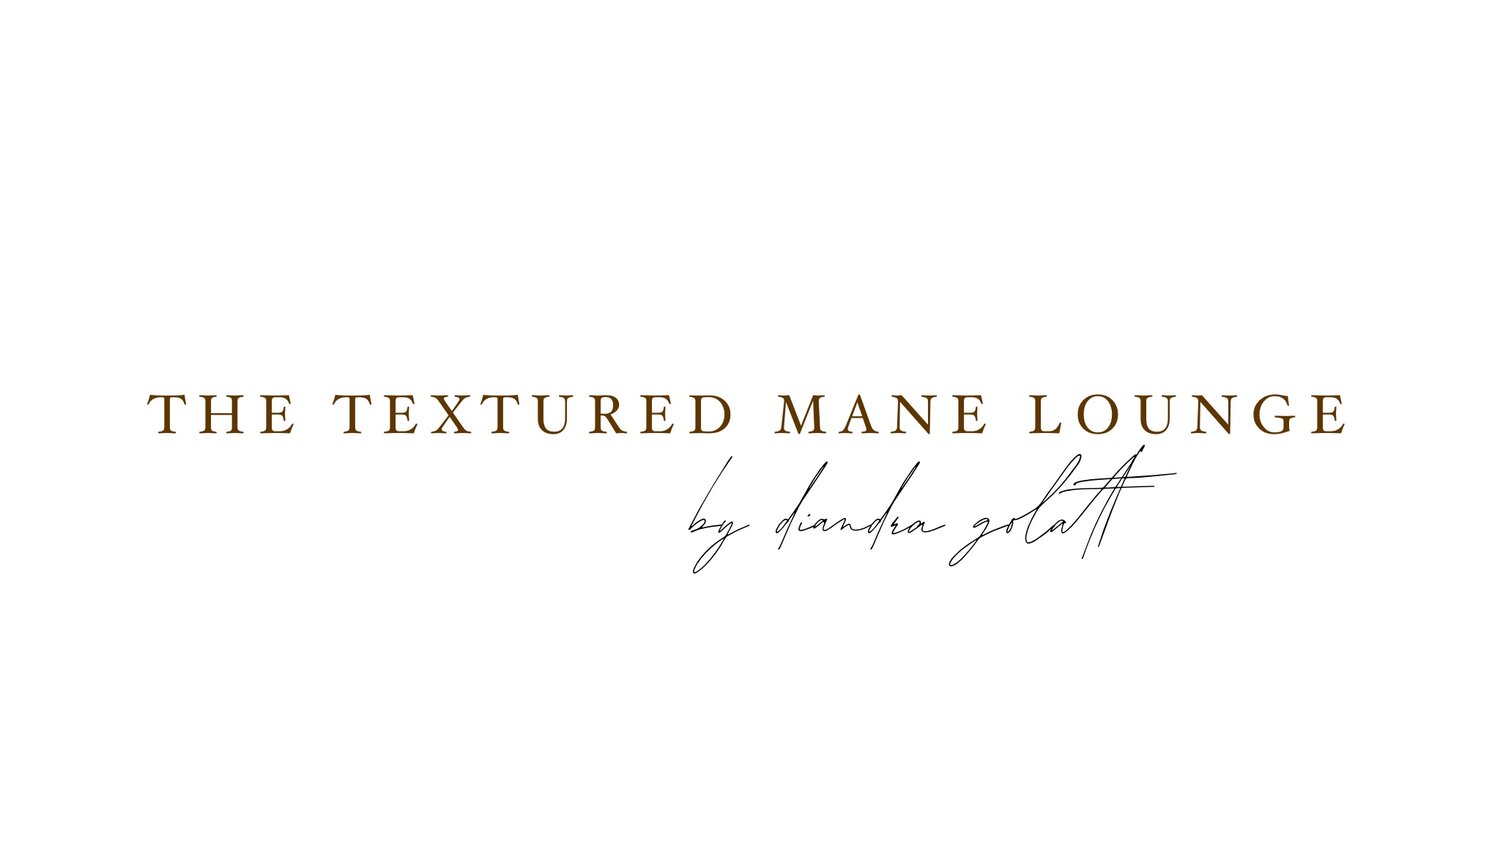 The Textured Mane Lounge